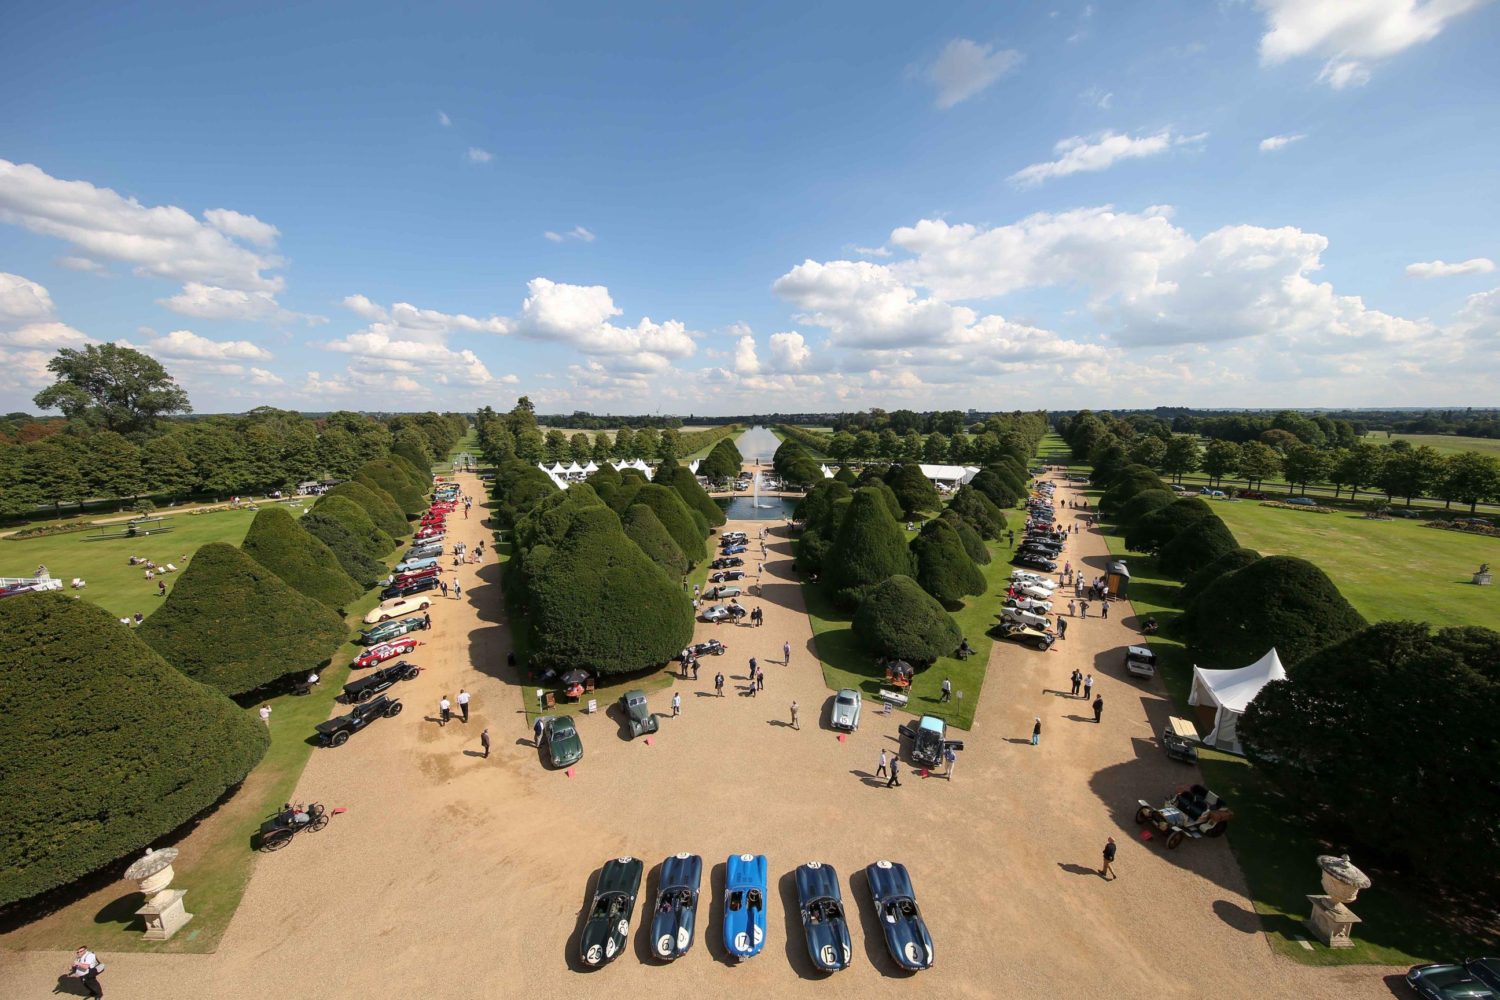 CONCOURS OF ELEGANCE CELEBRATES WEEKEND OF MOTORING ROYALTY AT HAMPTON COURT PALACE